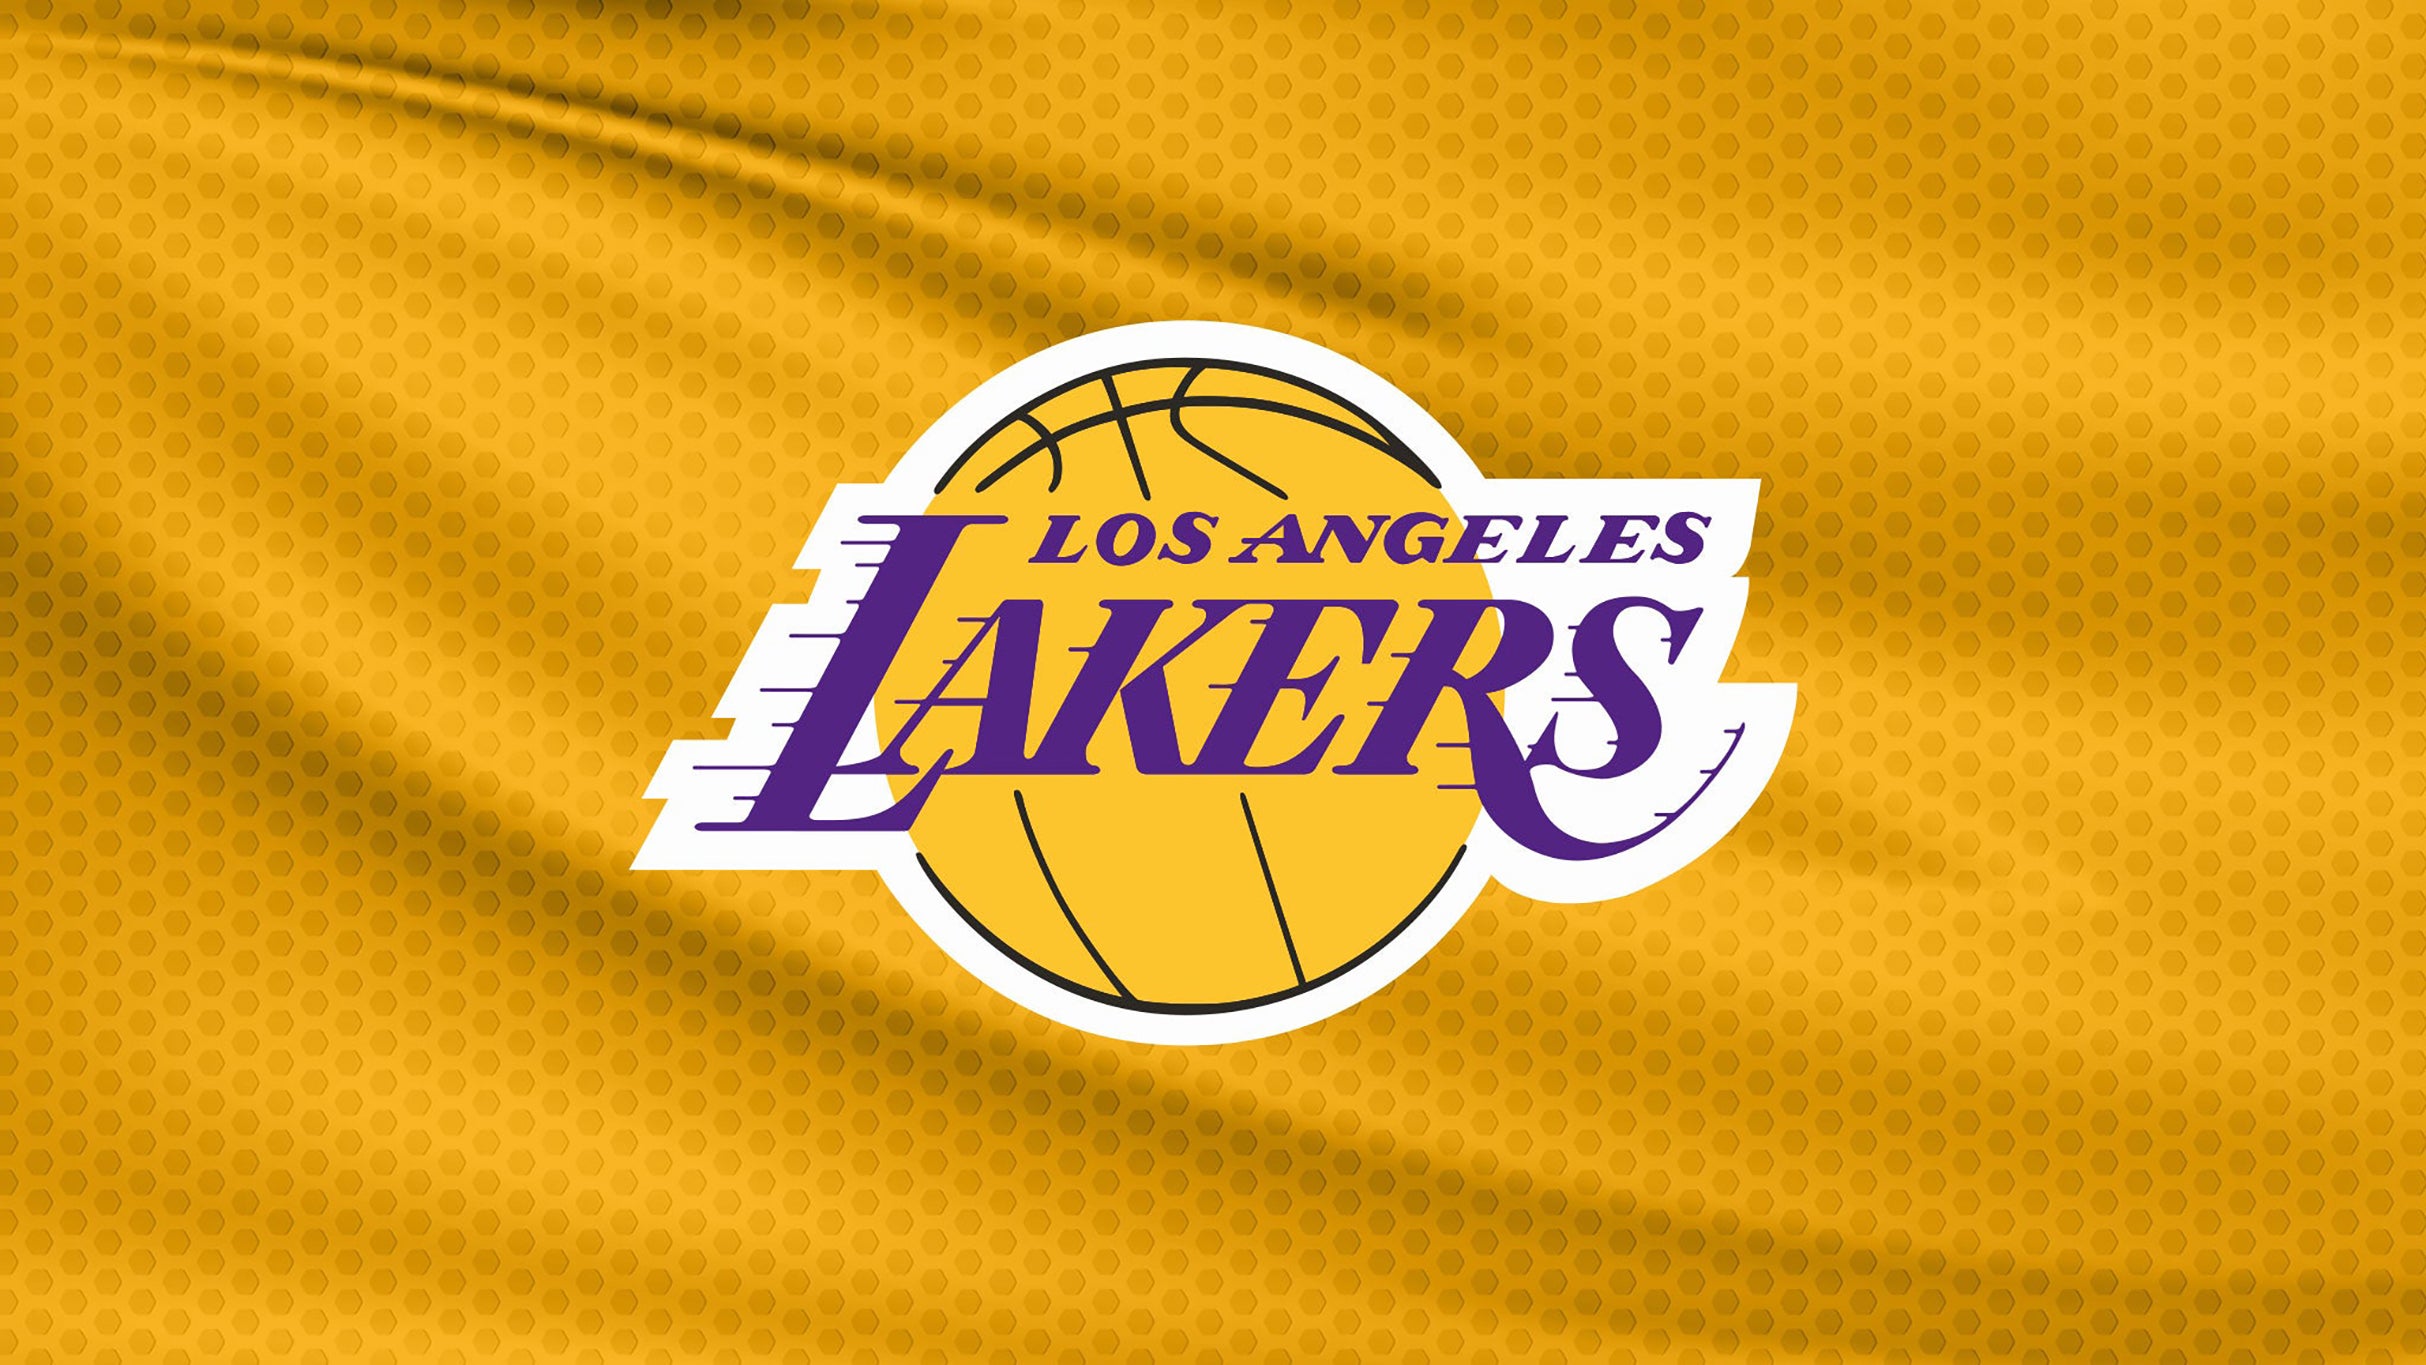 Los Angeles Lakers vs Minnesota Timberwolves presale code for show tickets in Palm Desert, CA (Acrisure Arena at Greater Palm Springs)